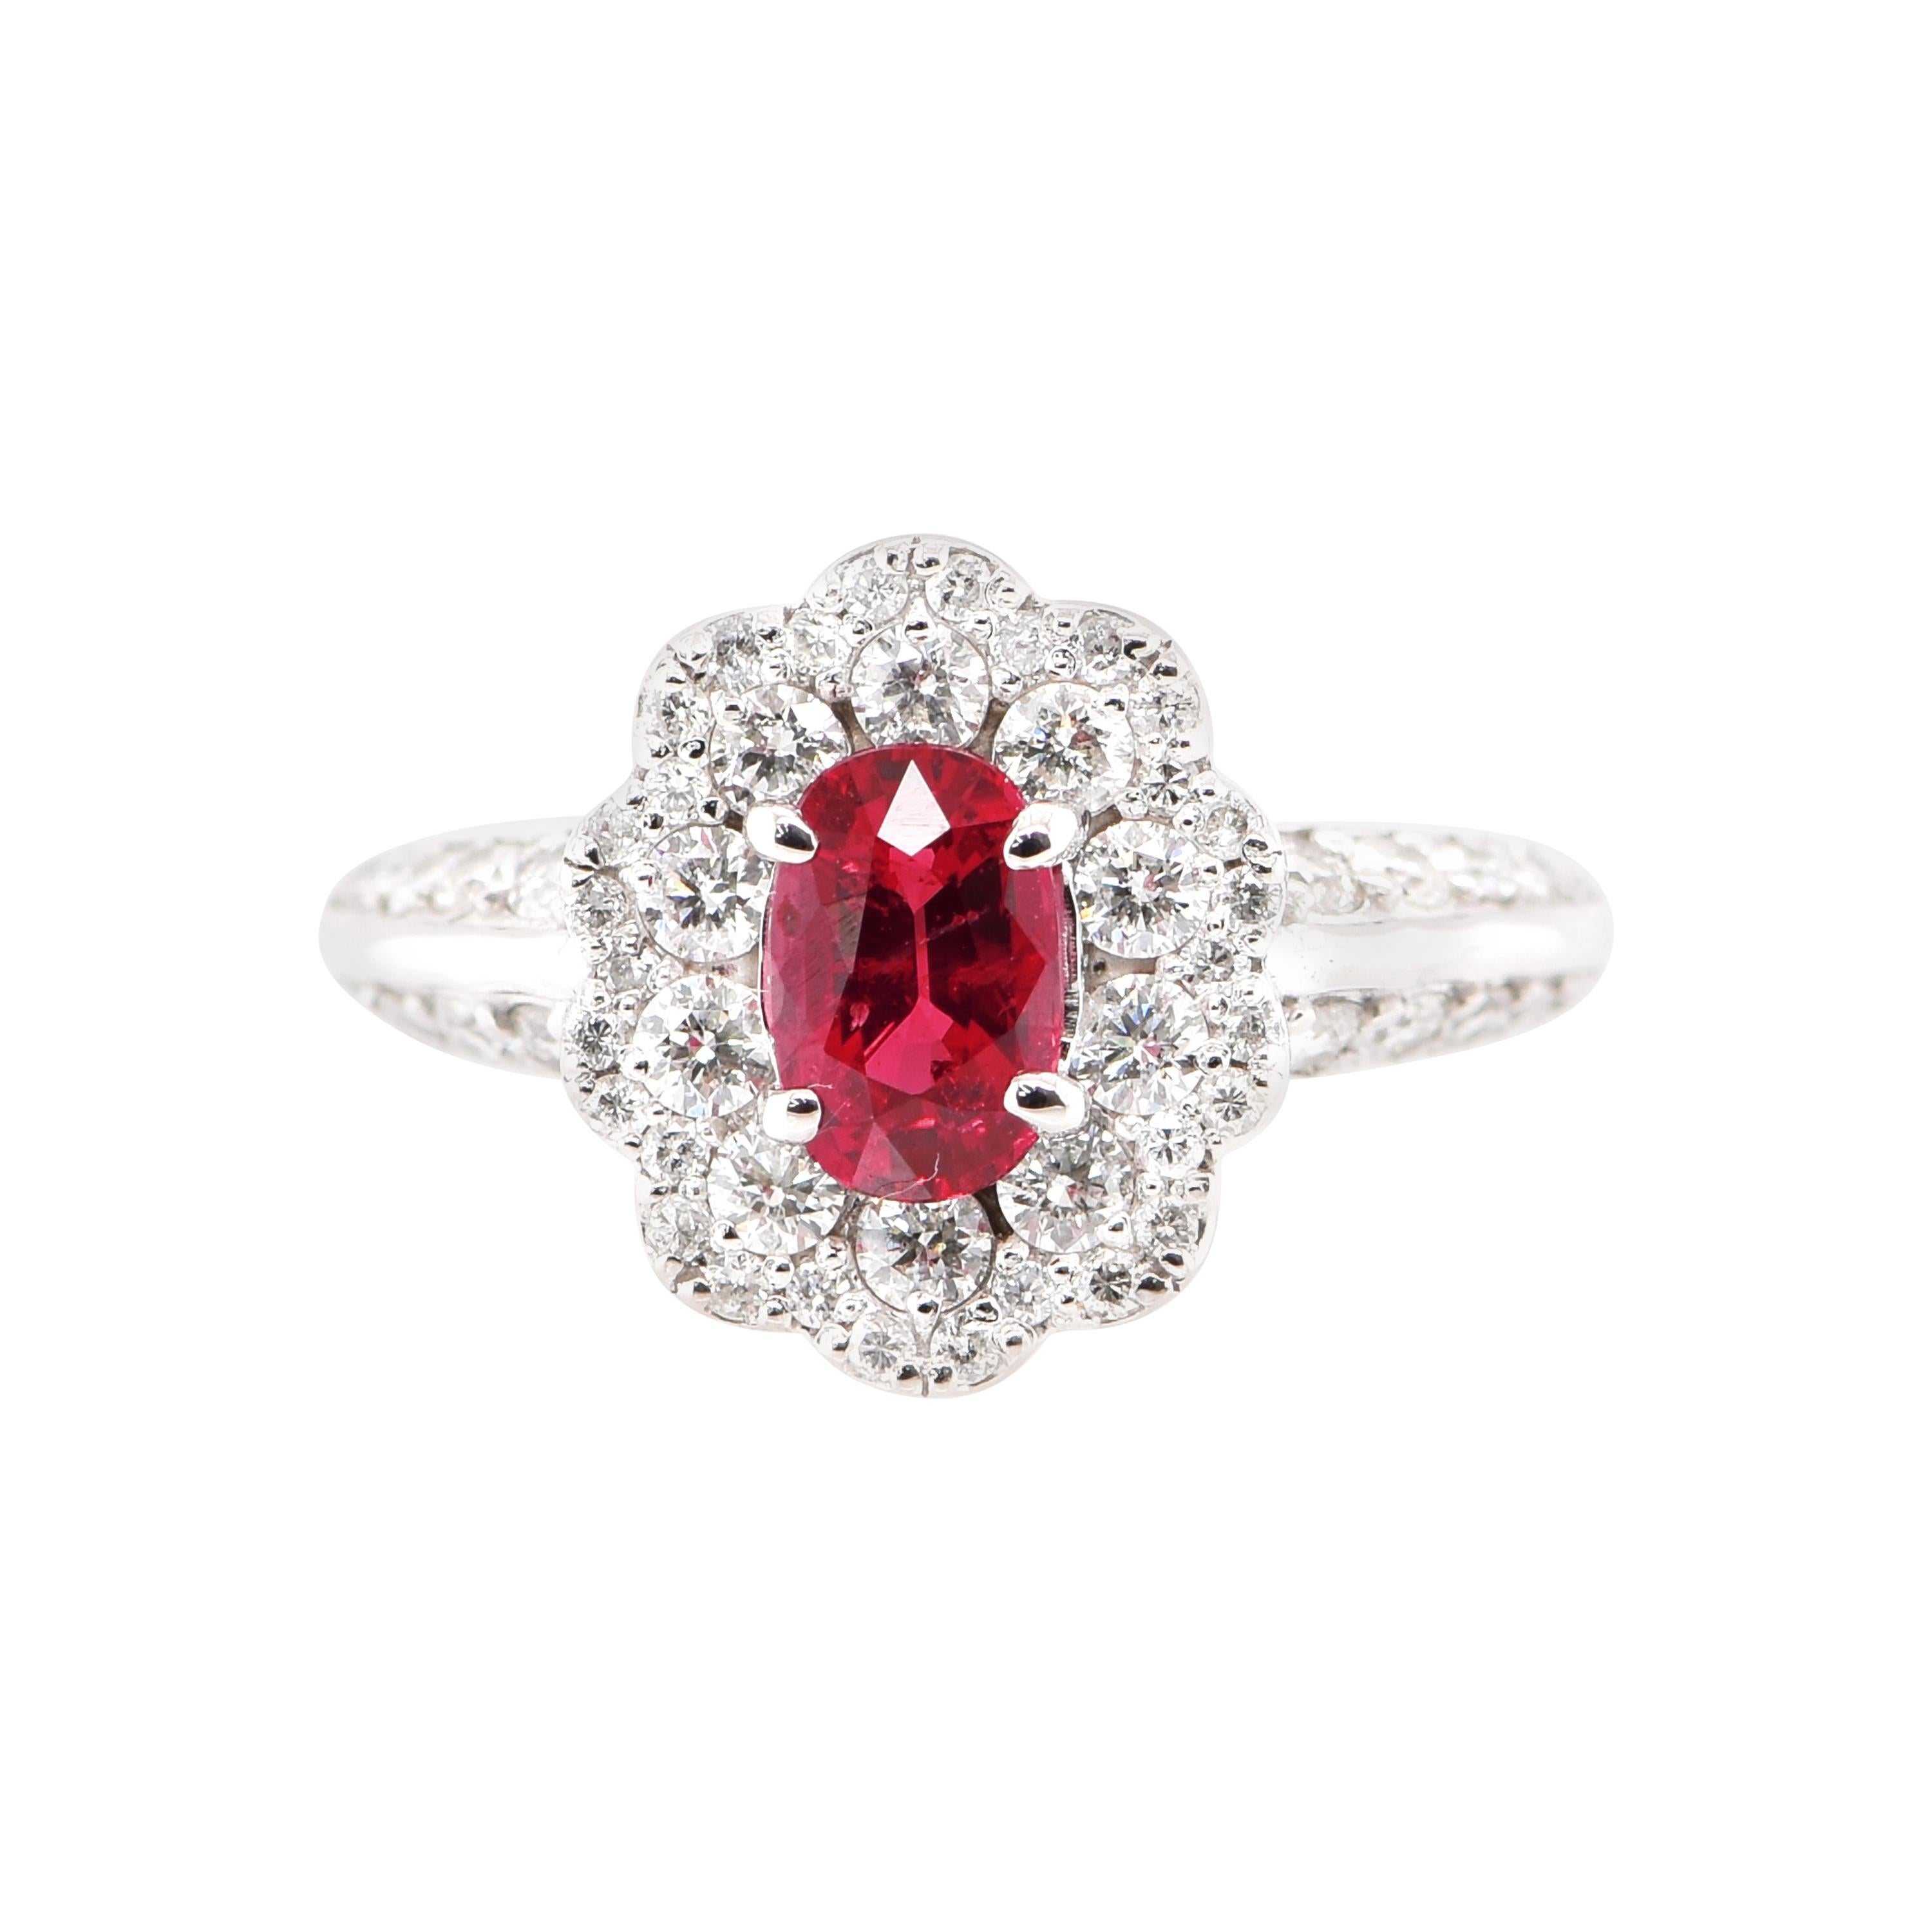 1.00 Carat Natural Ruby and Diamond Halo Ring Set in Platinum